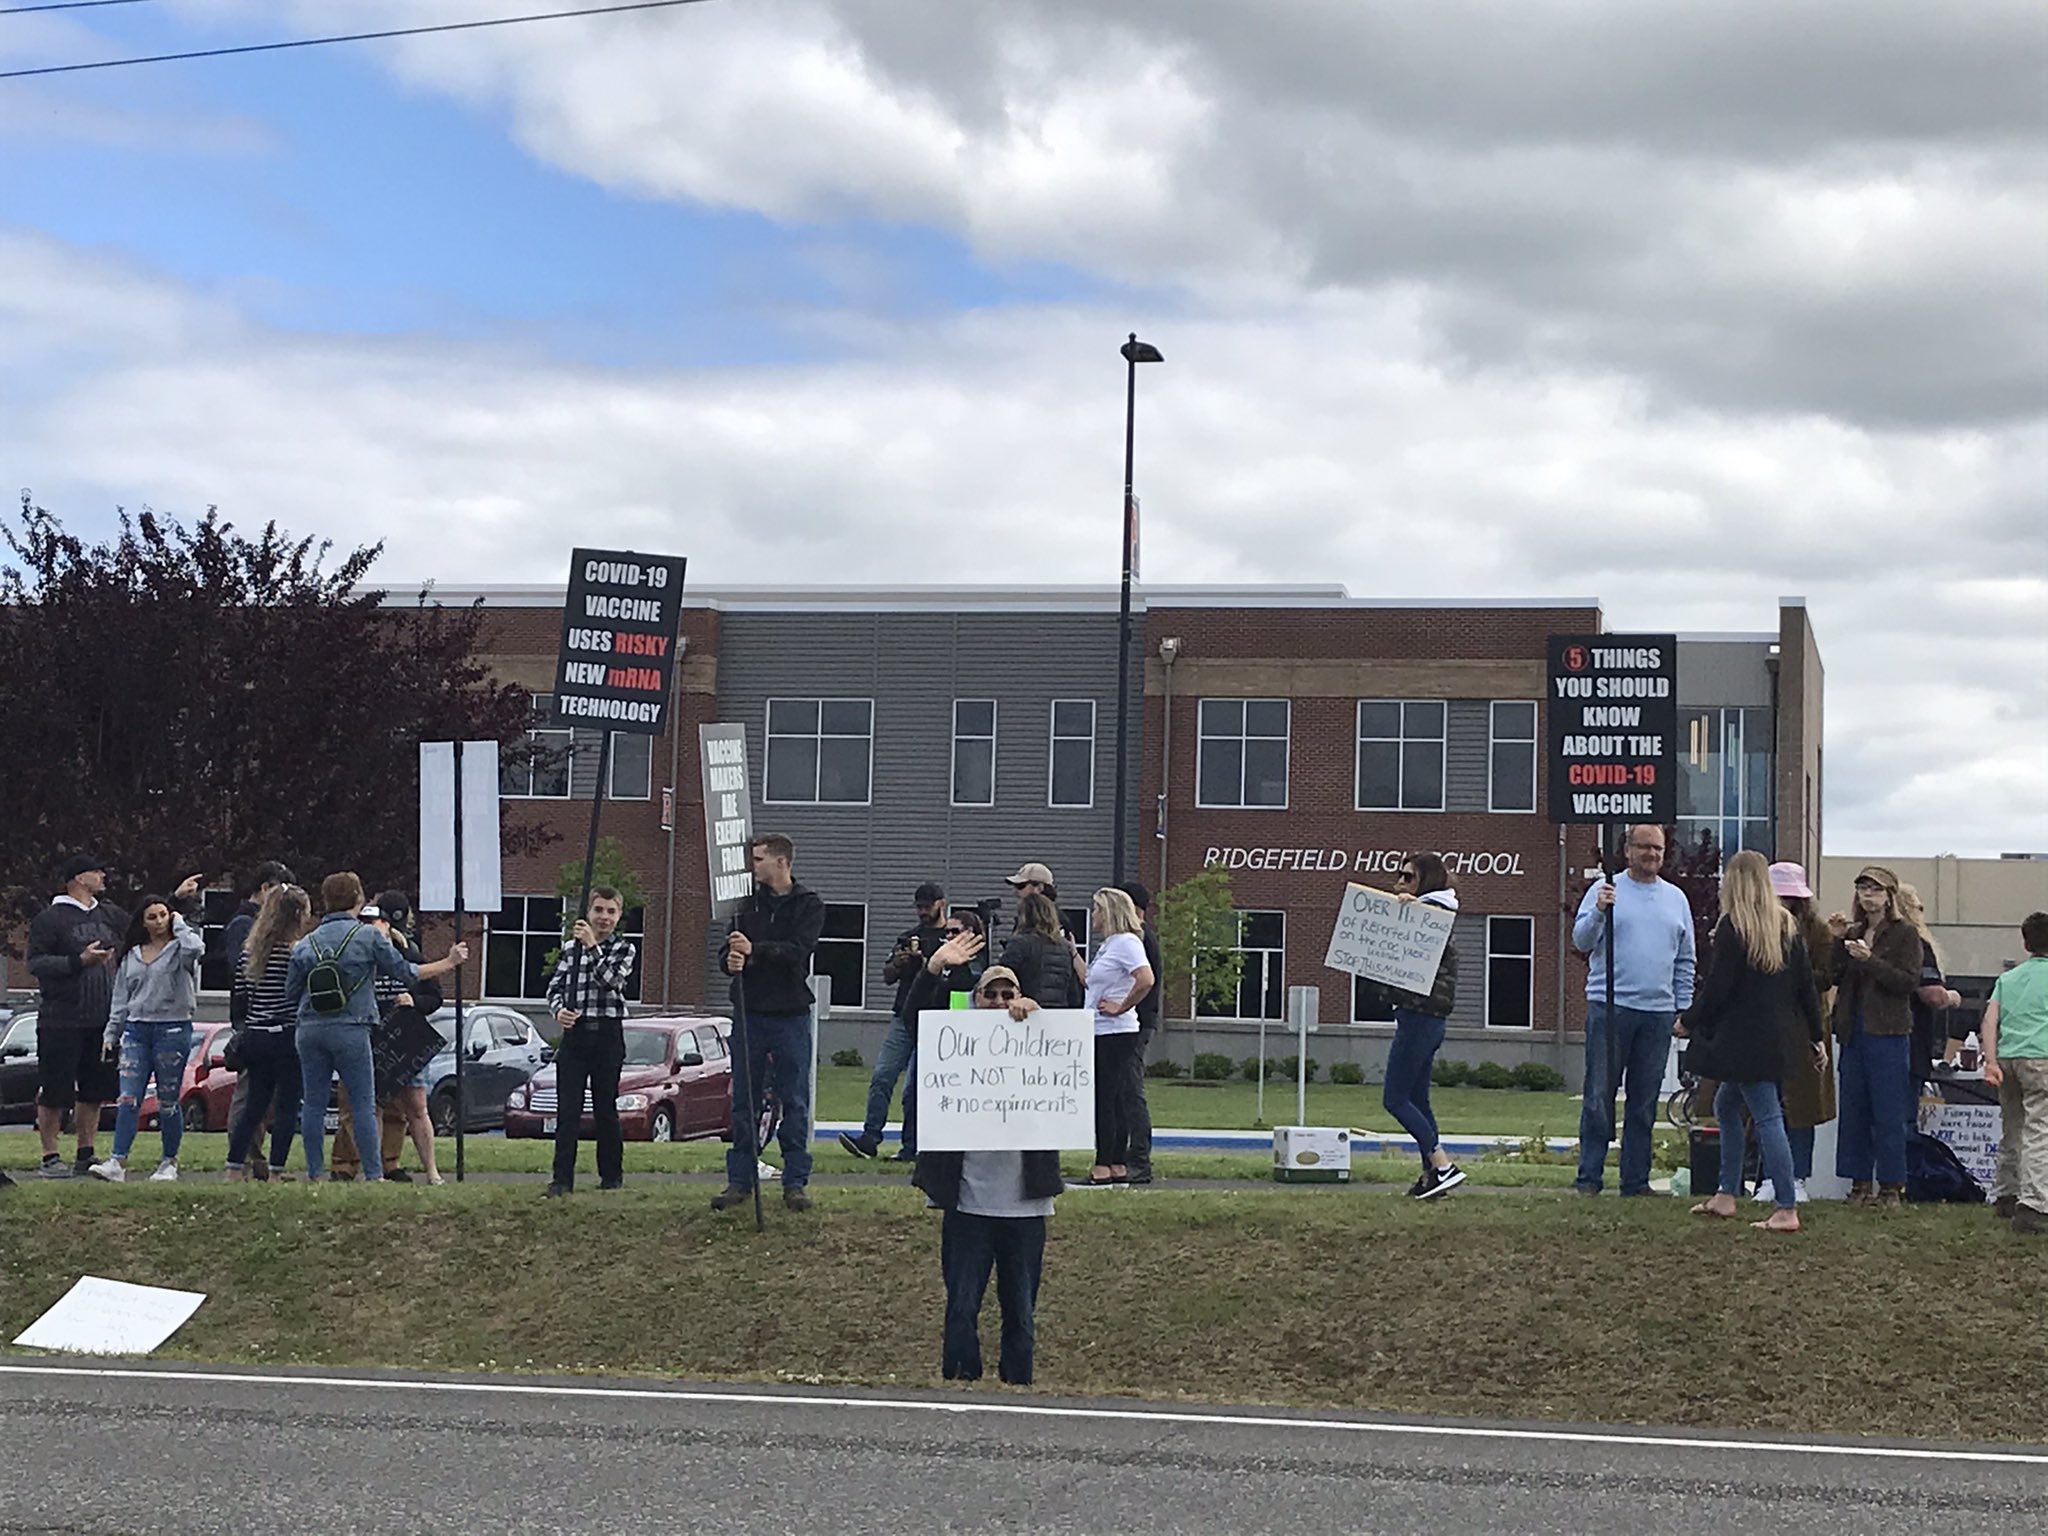 Anti-vaccination protesters gather outside Ridgefield High School, which is hosting a COVID-19 vaccination clinic organized by students today.